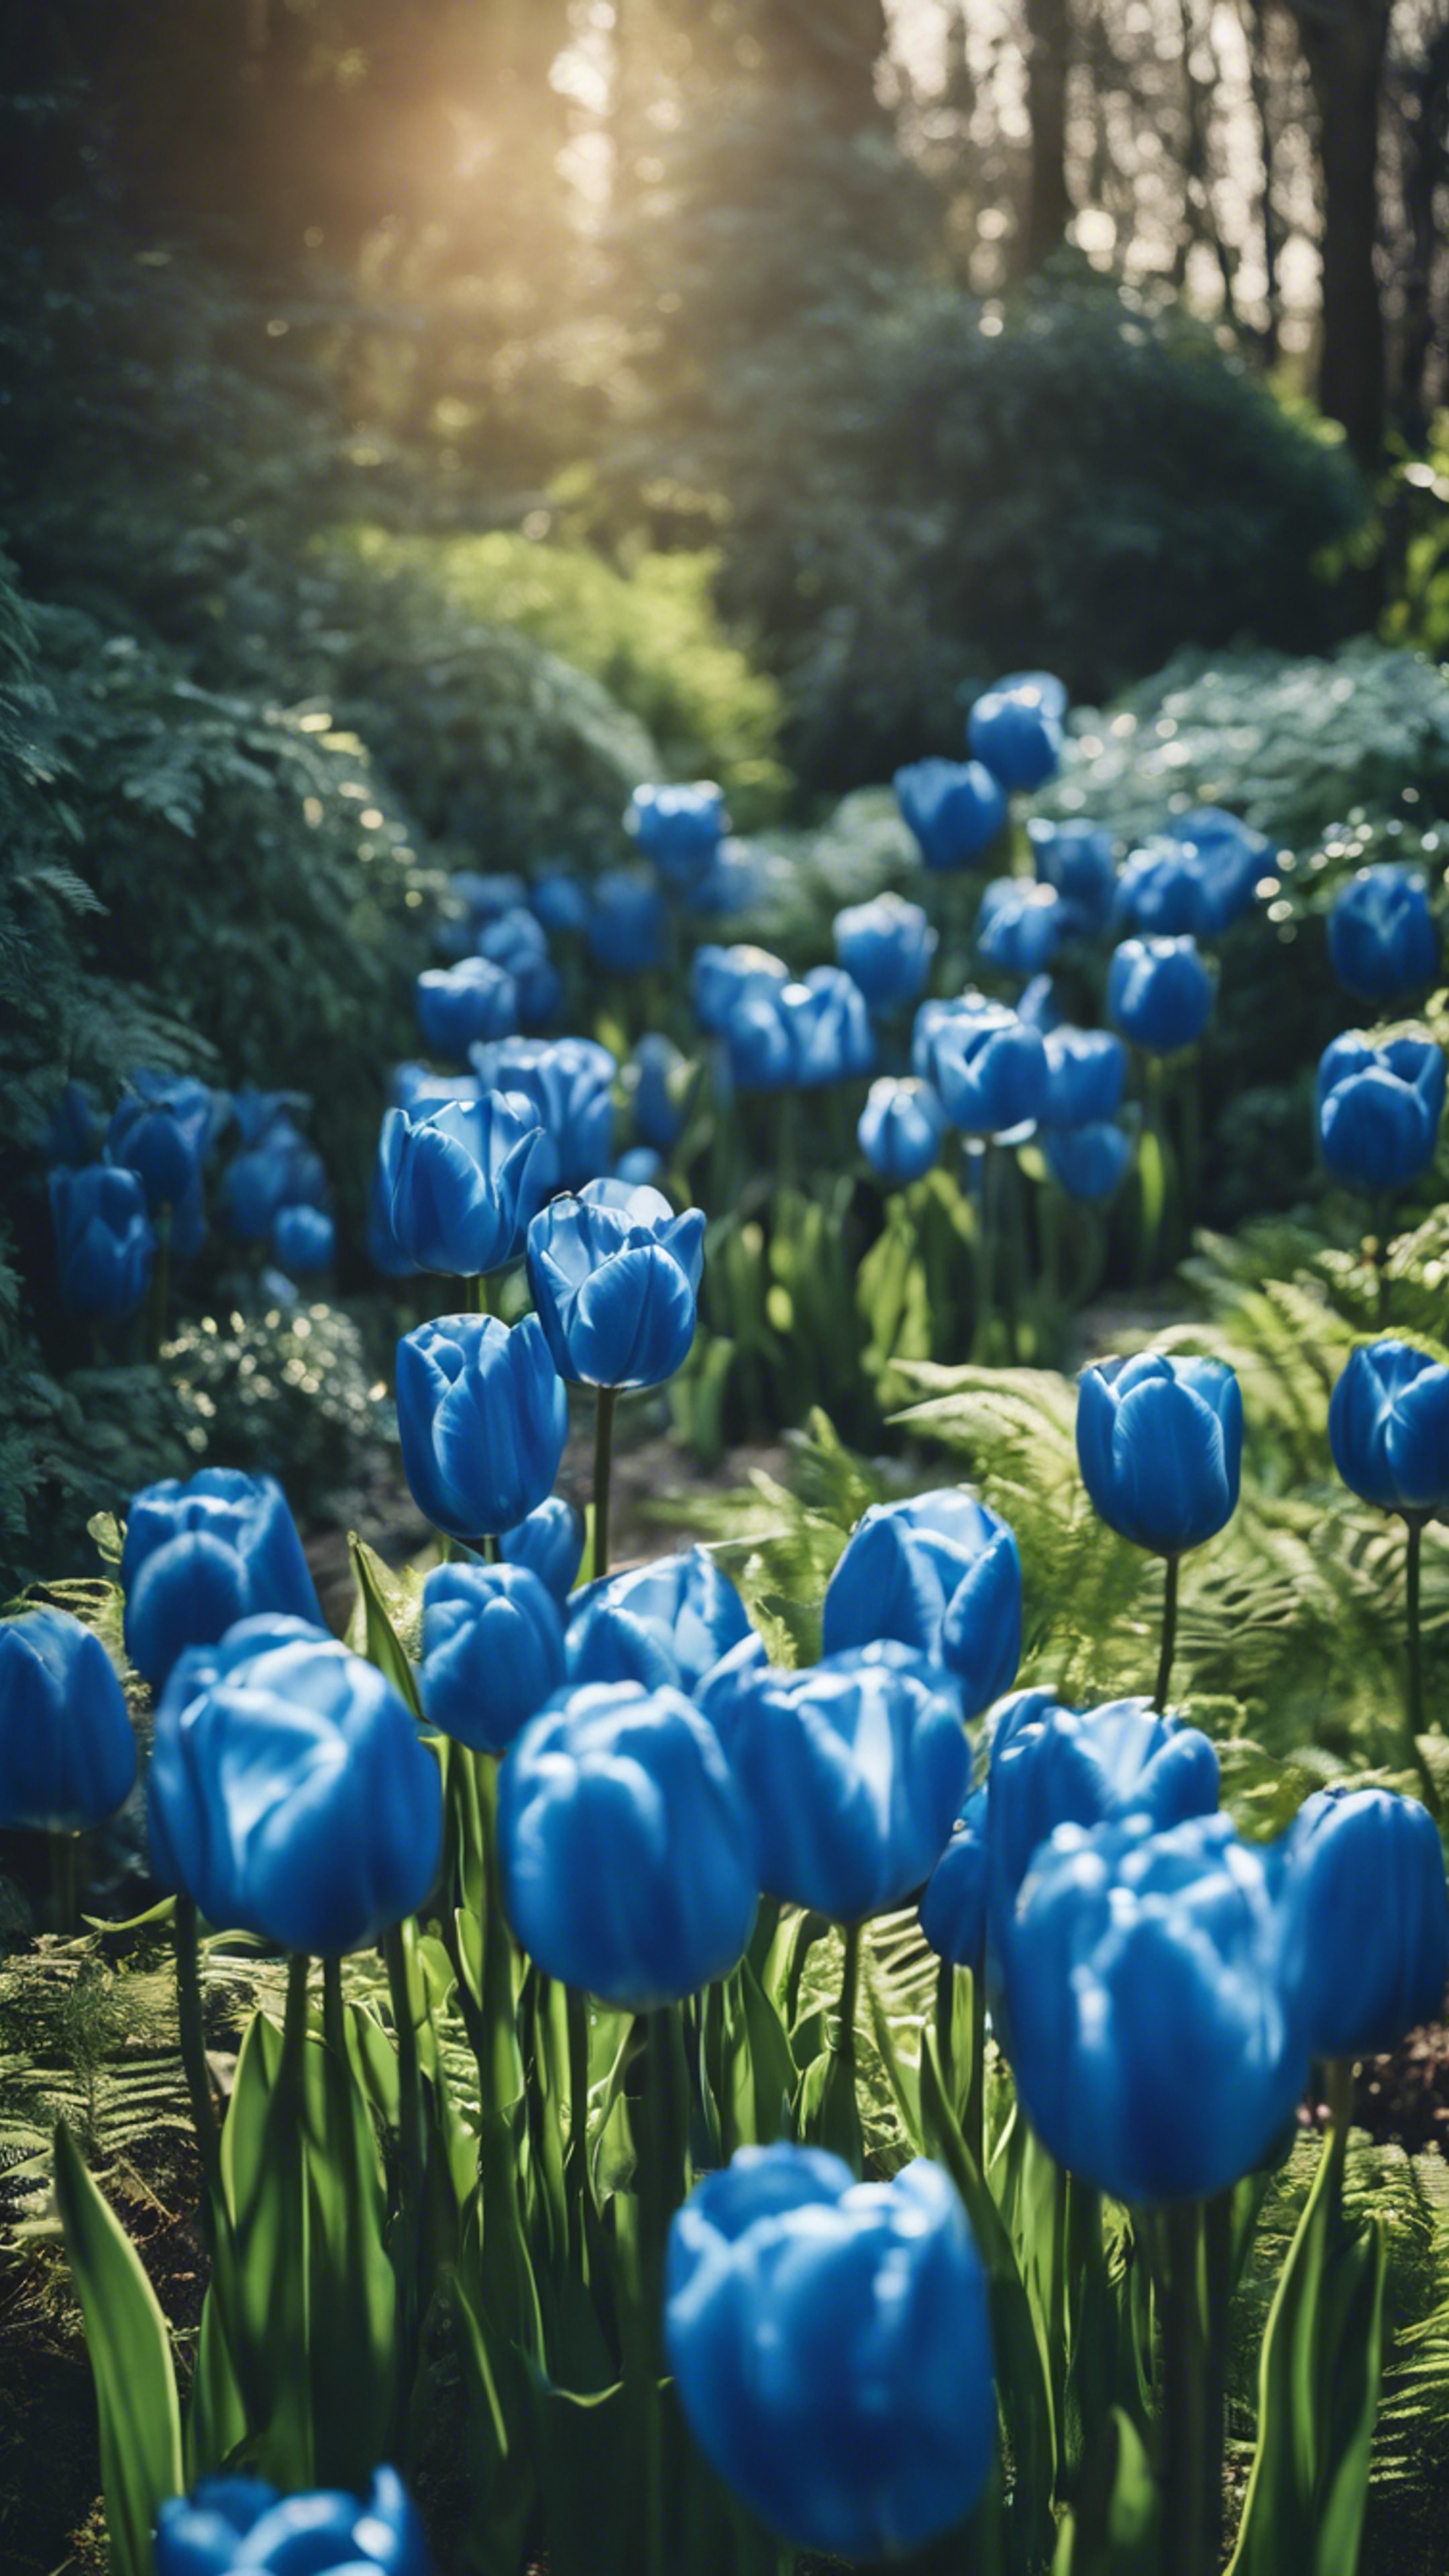 A vibrant illustration of blue tulips amidst ferns and ivy in a garden at the crack of dawn. Ფონი[e8b6b27cf94f4f81bdac]